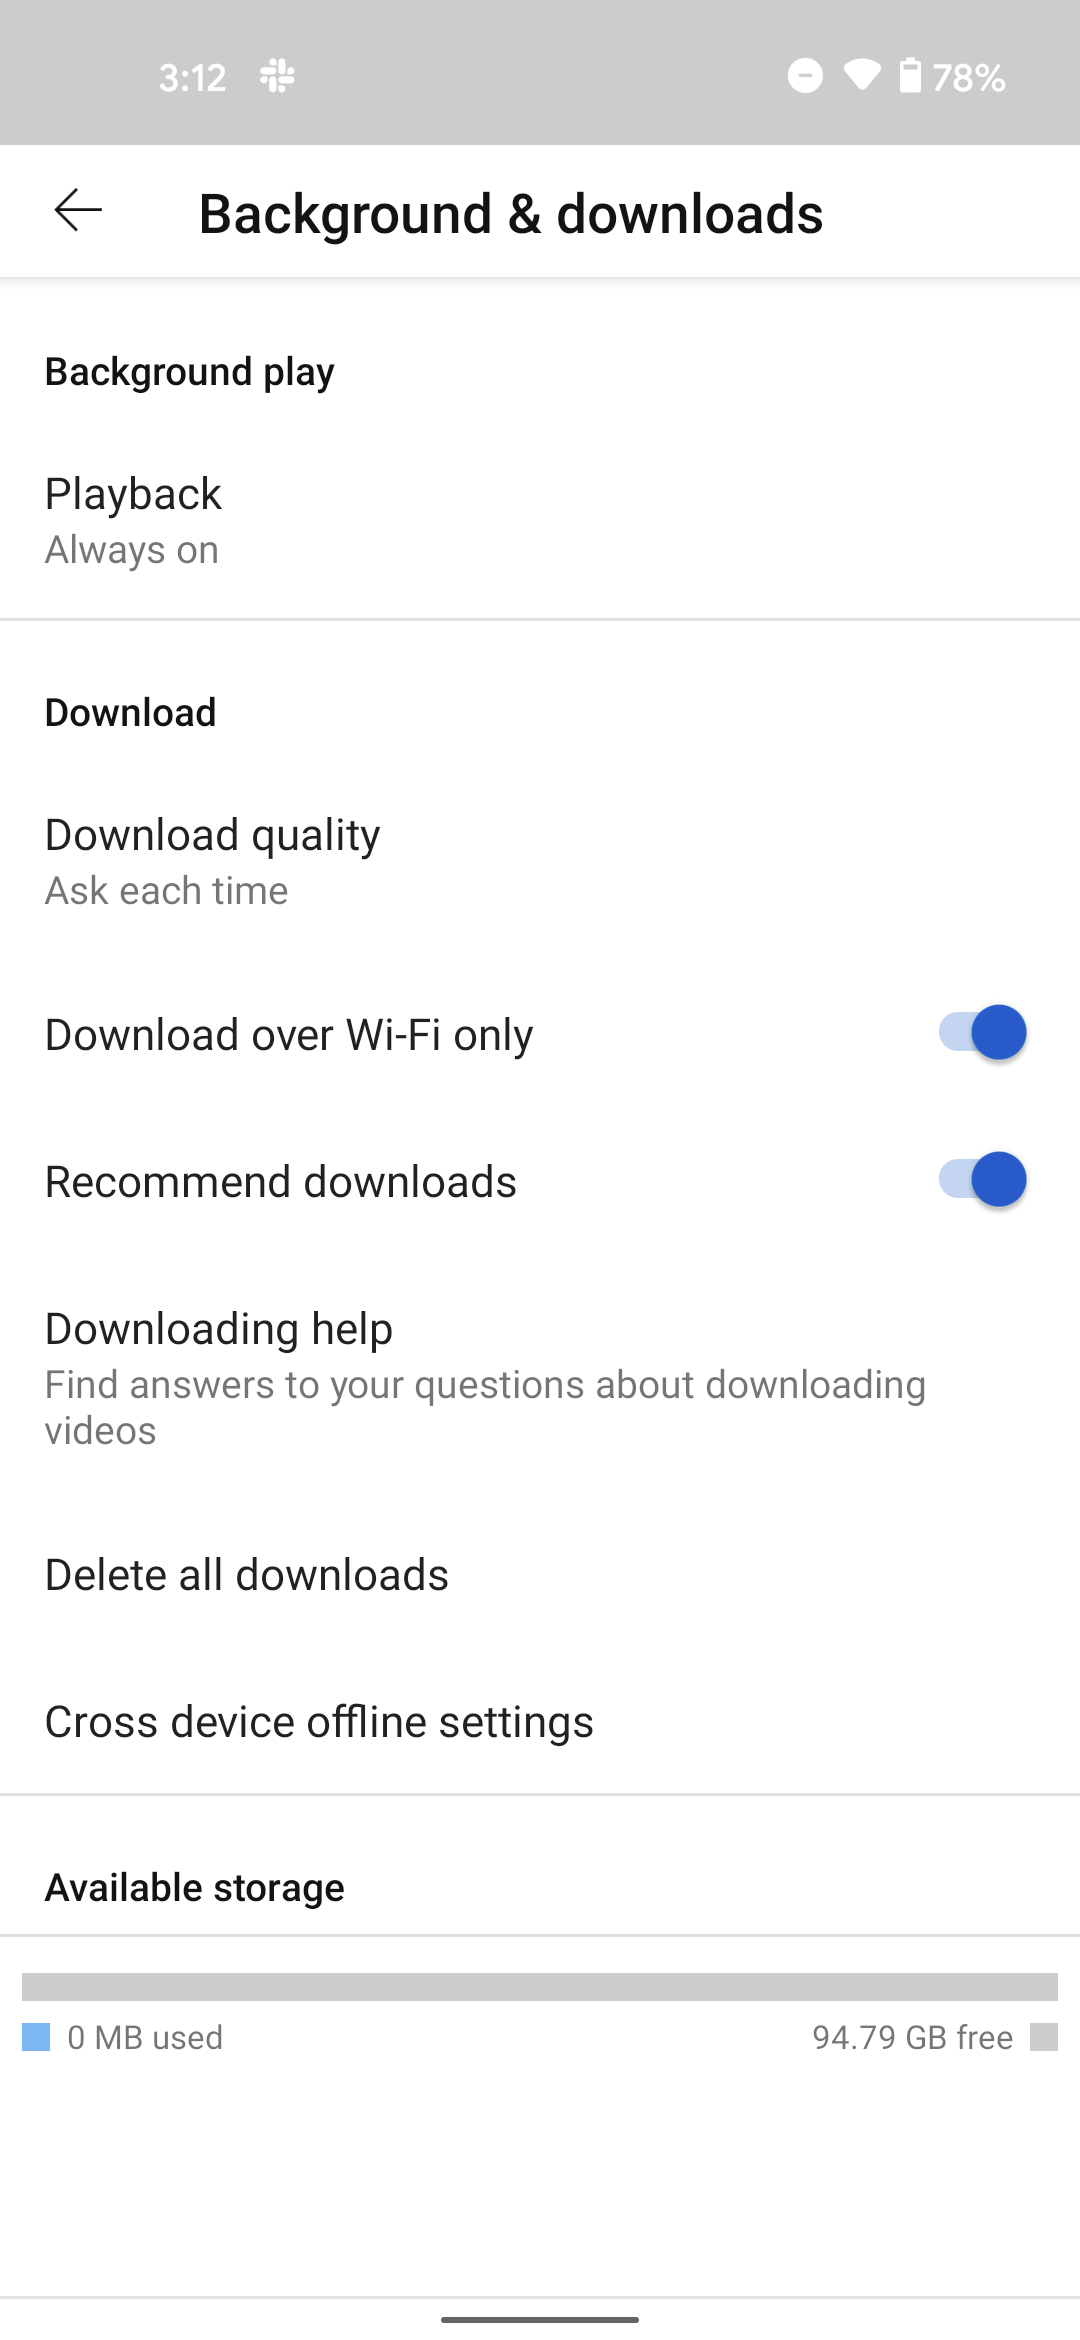 YouTube briefly tested cross-device downloads